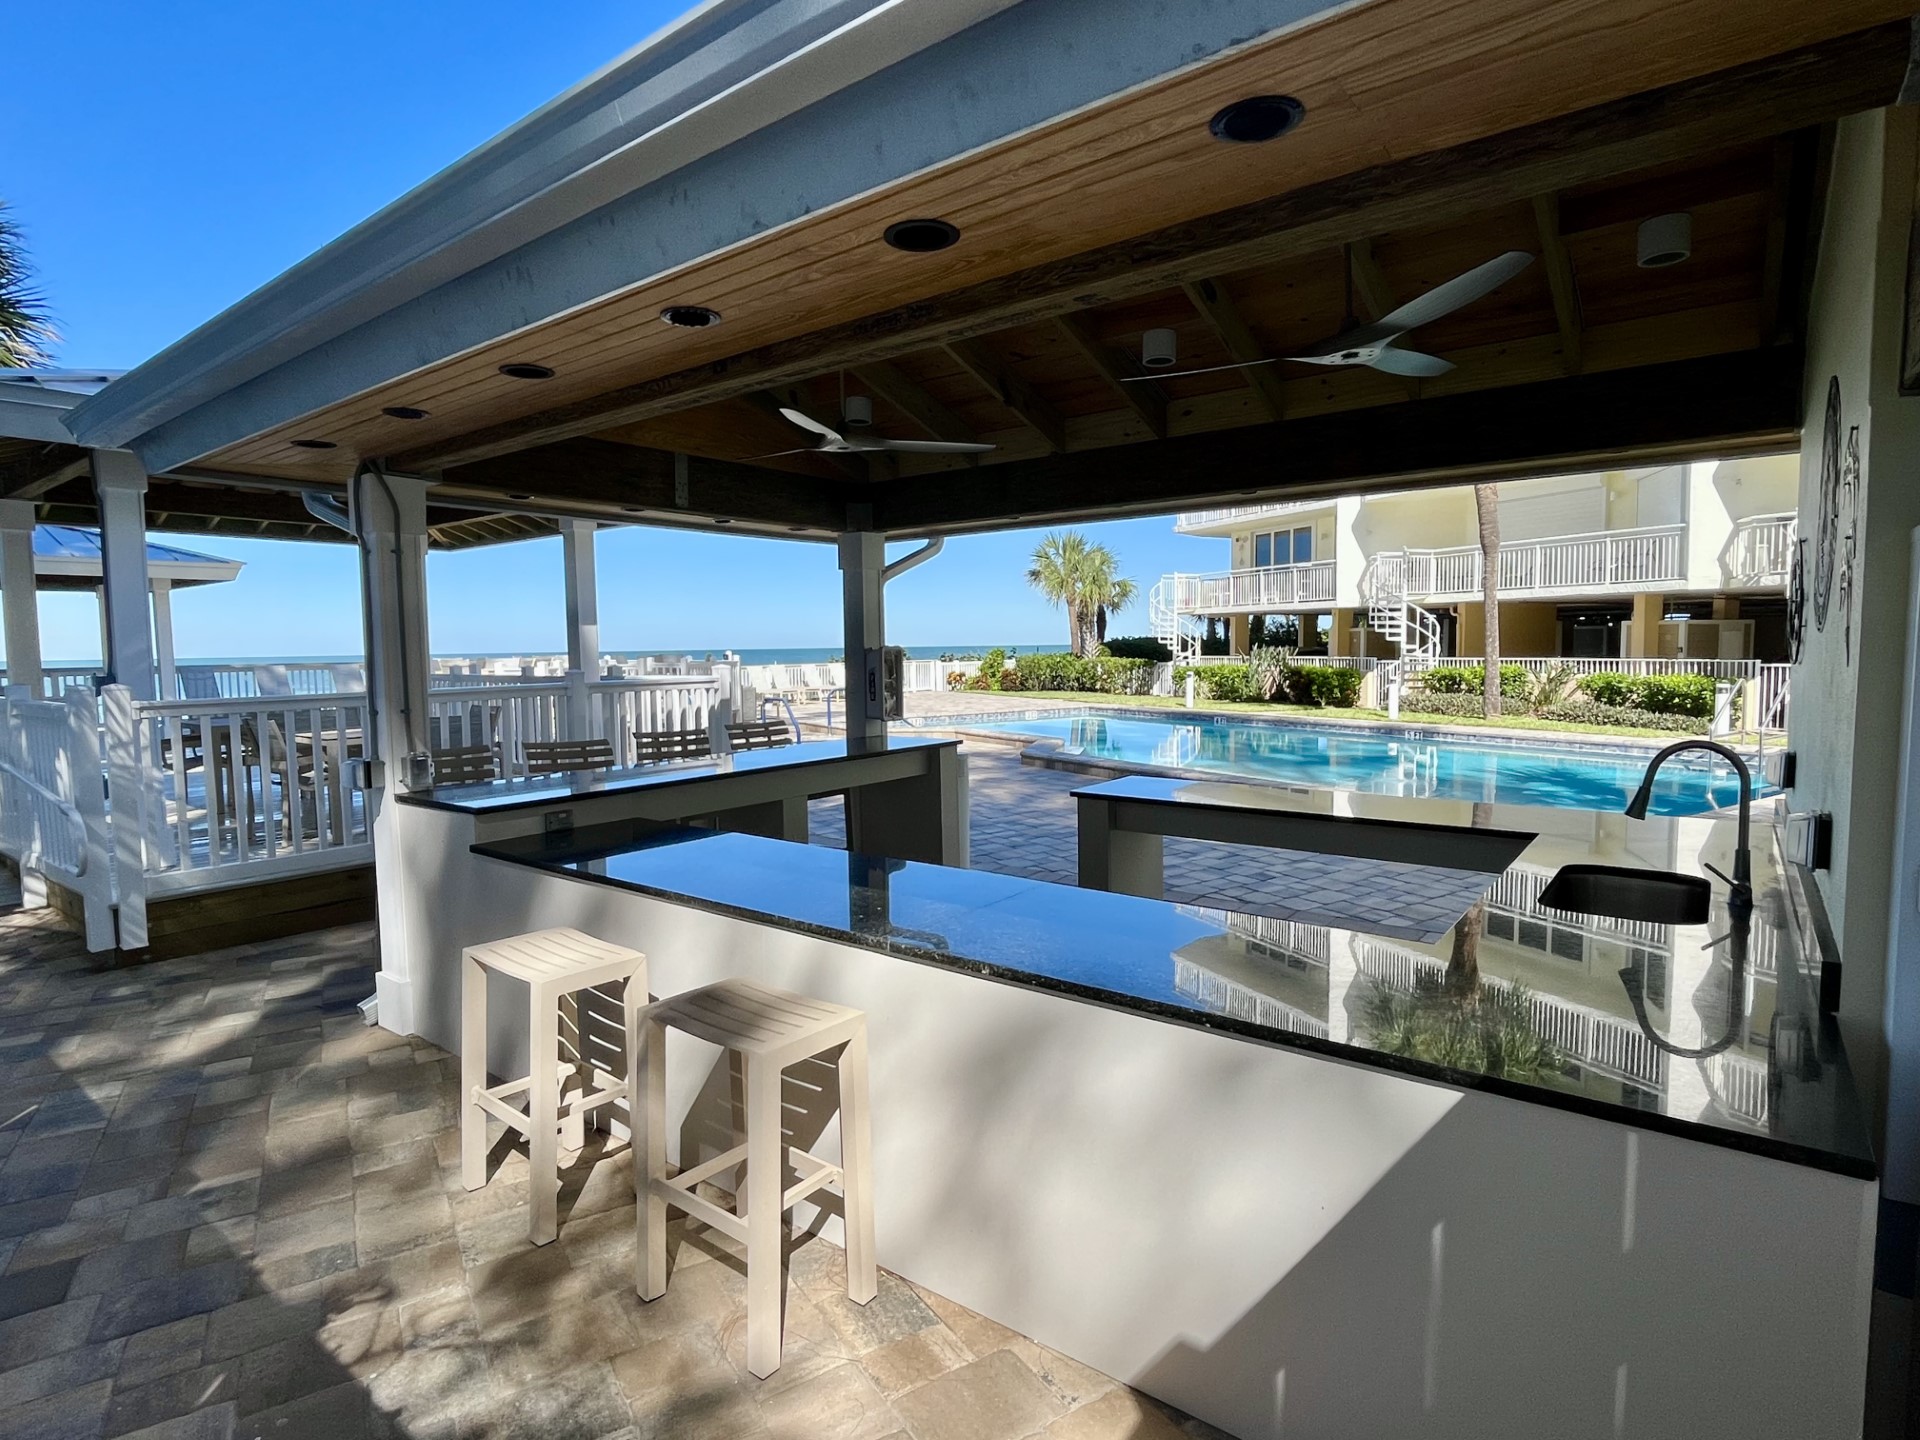 Smart Design: Integrating Technology into Outdoor Kitchens